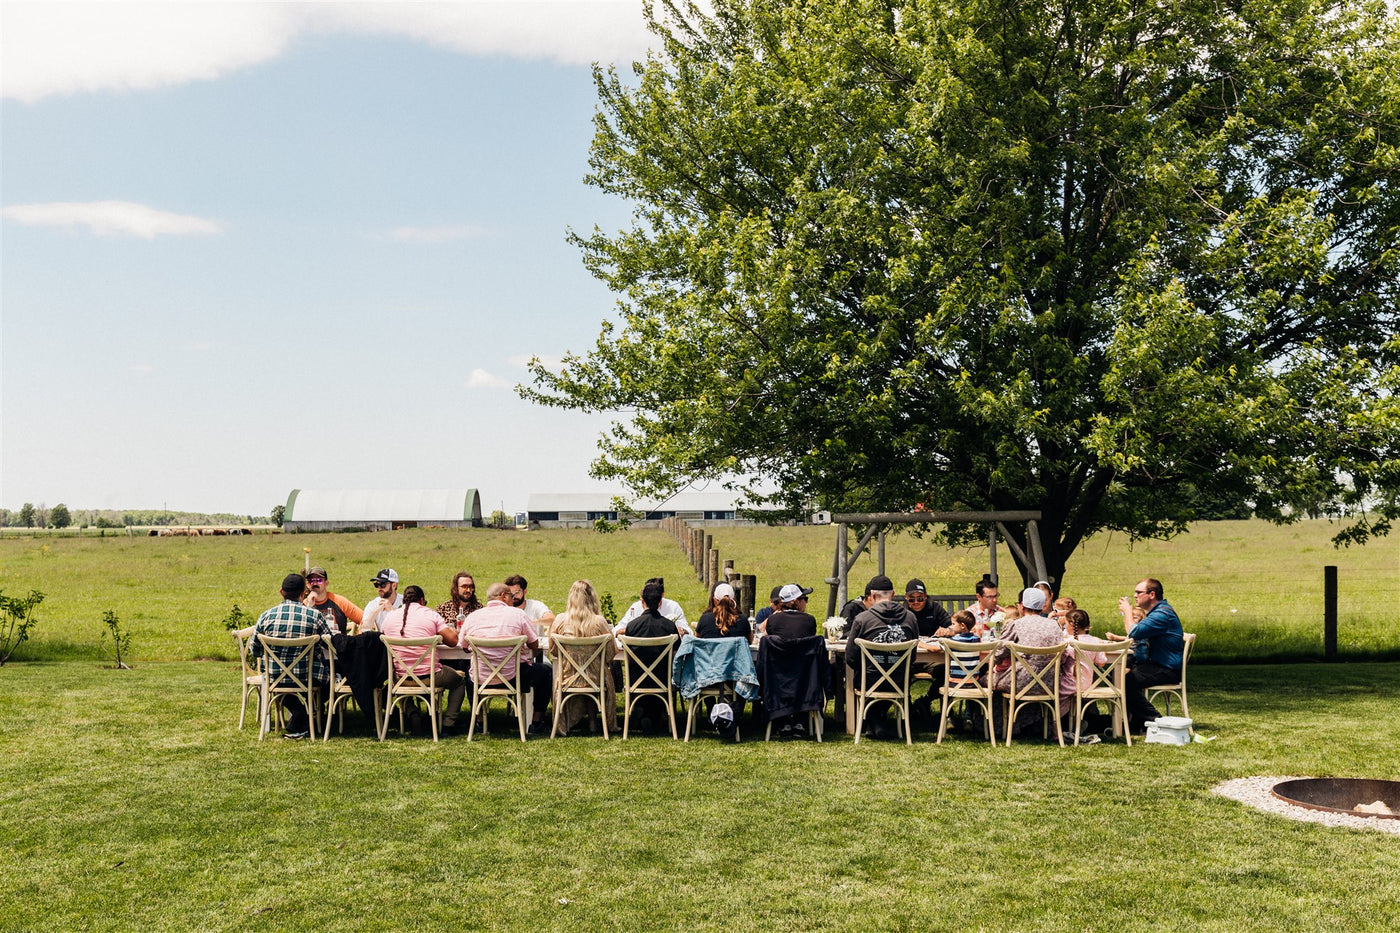 Group of people dining outdoors at a long table on a green lawn with a tree and farm buildings in the background.